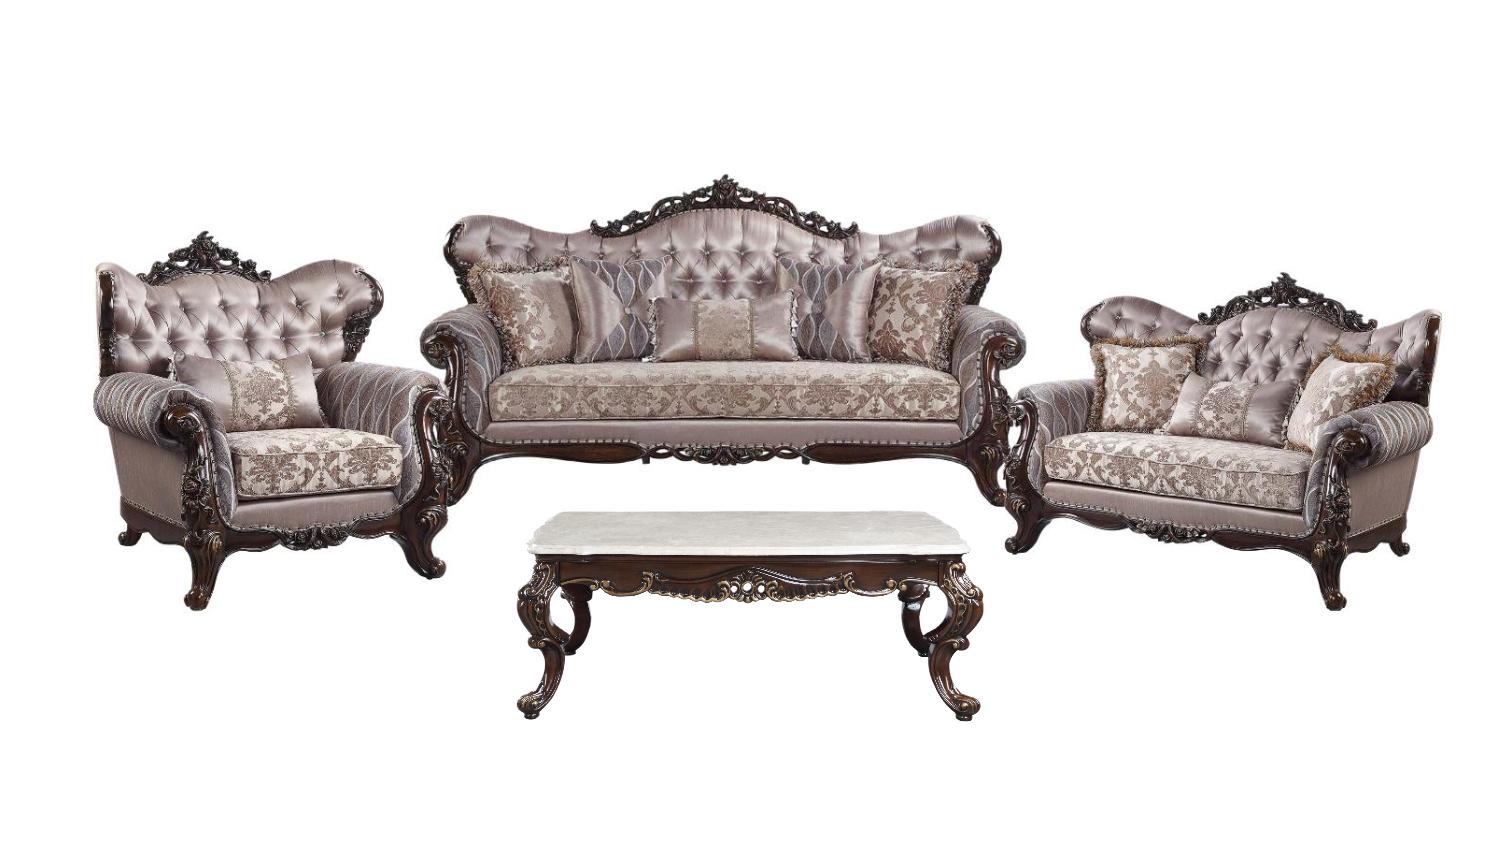 Traditional Sofa Loveseat Chair and Coffee Table Benbek LV00809-4pcs in Wash Oak Fabric